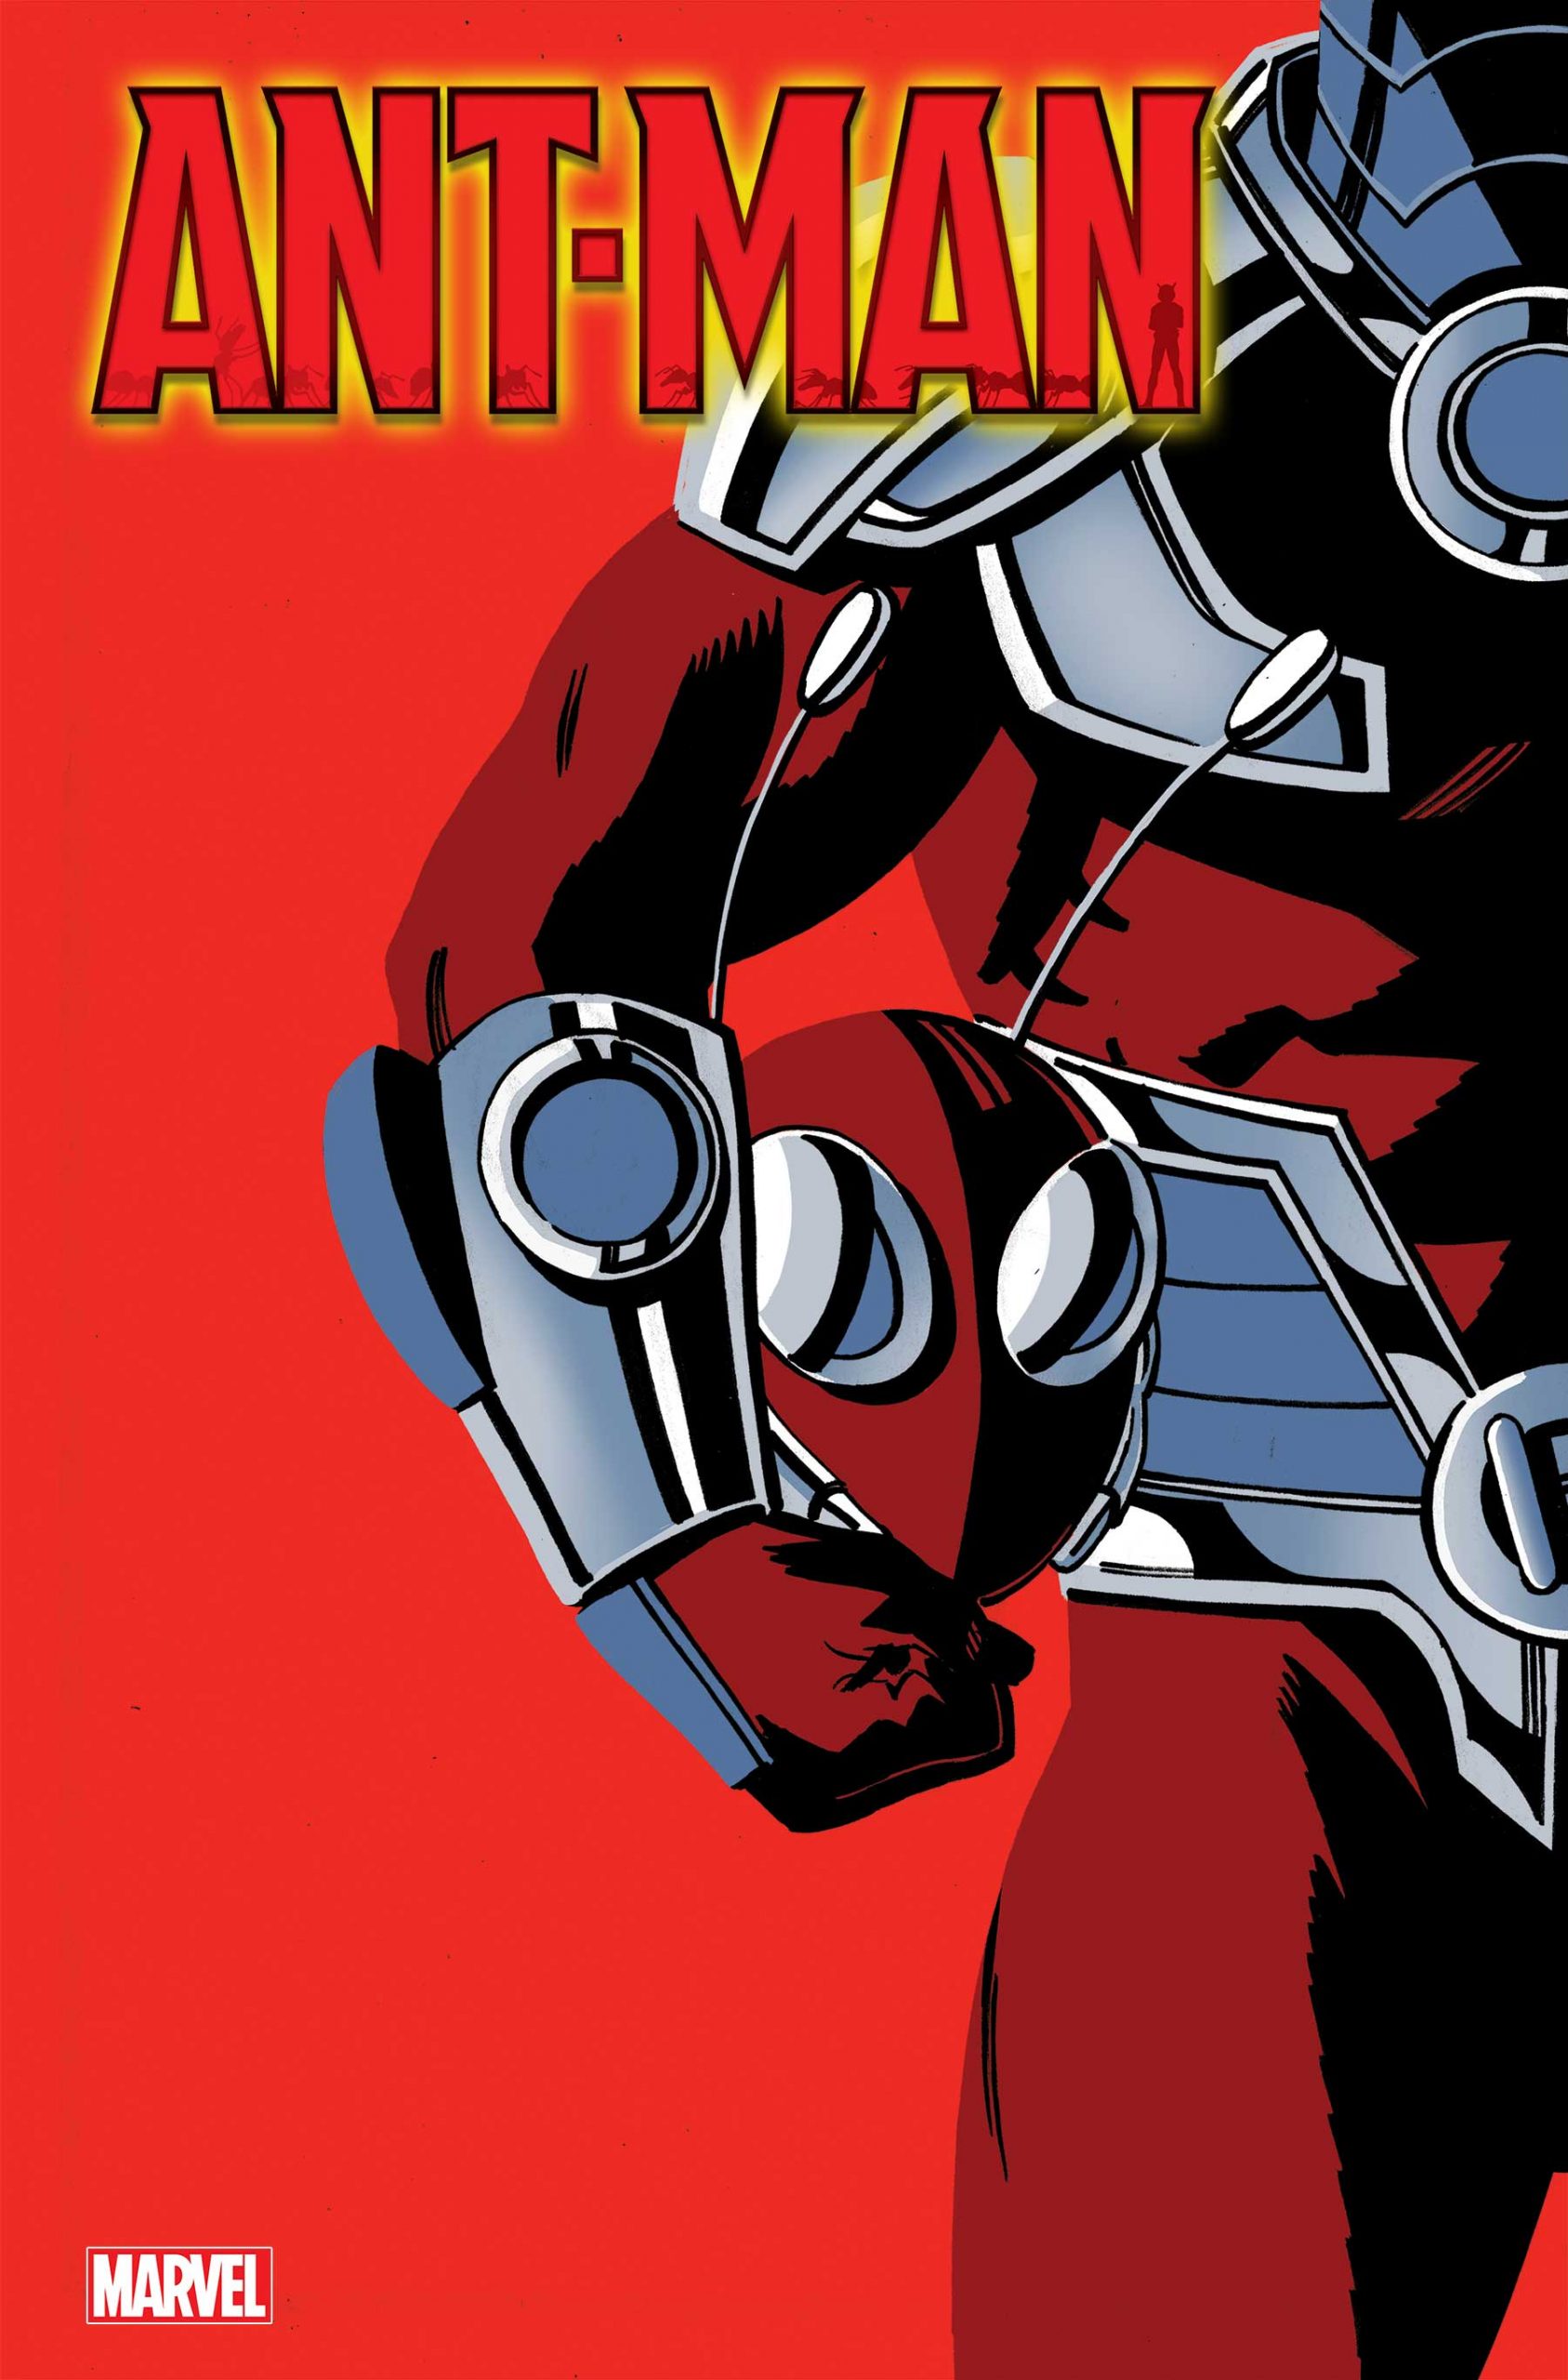 Marvel First Look: Ant-Man #2